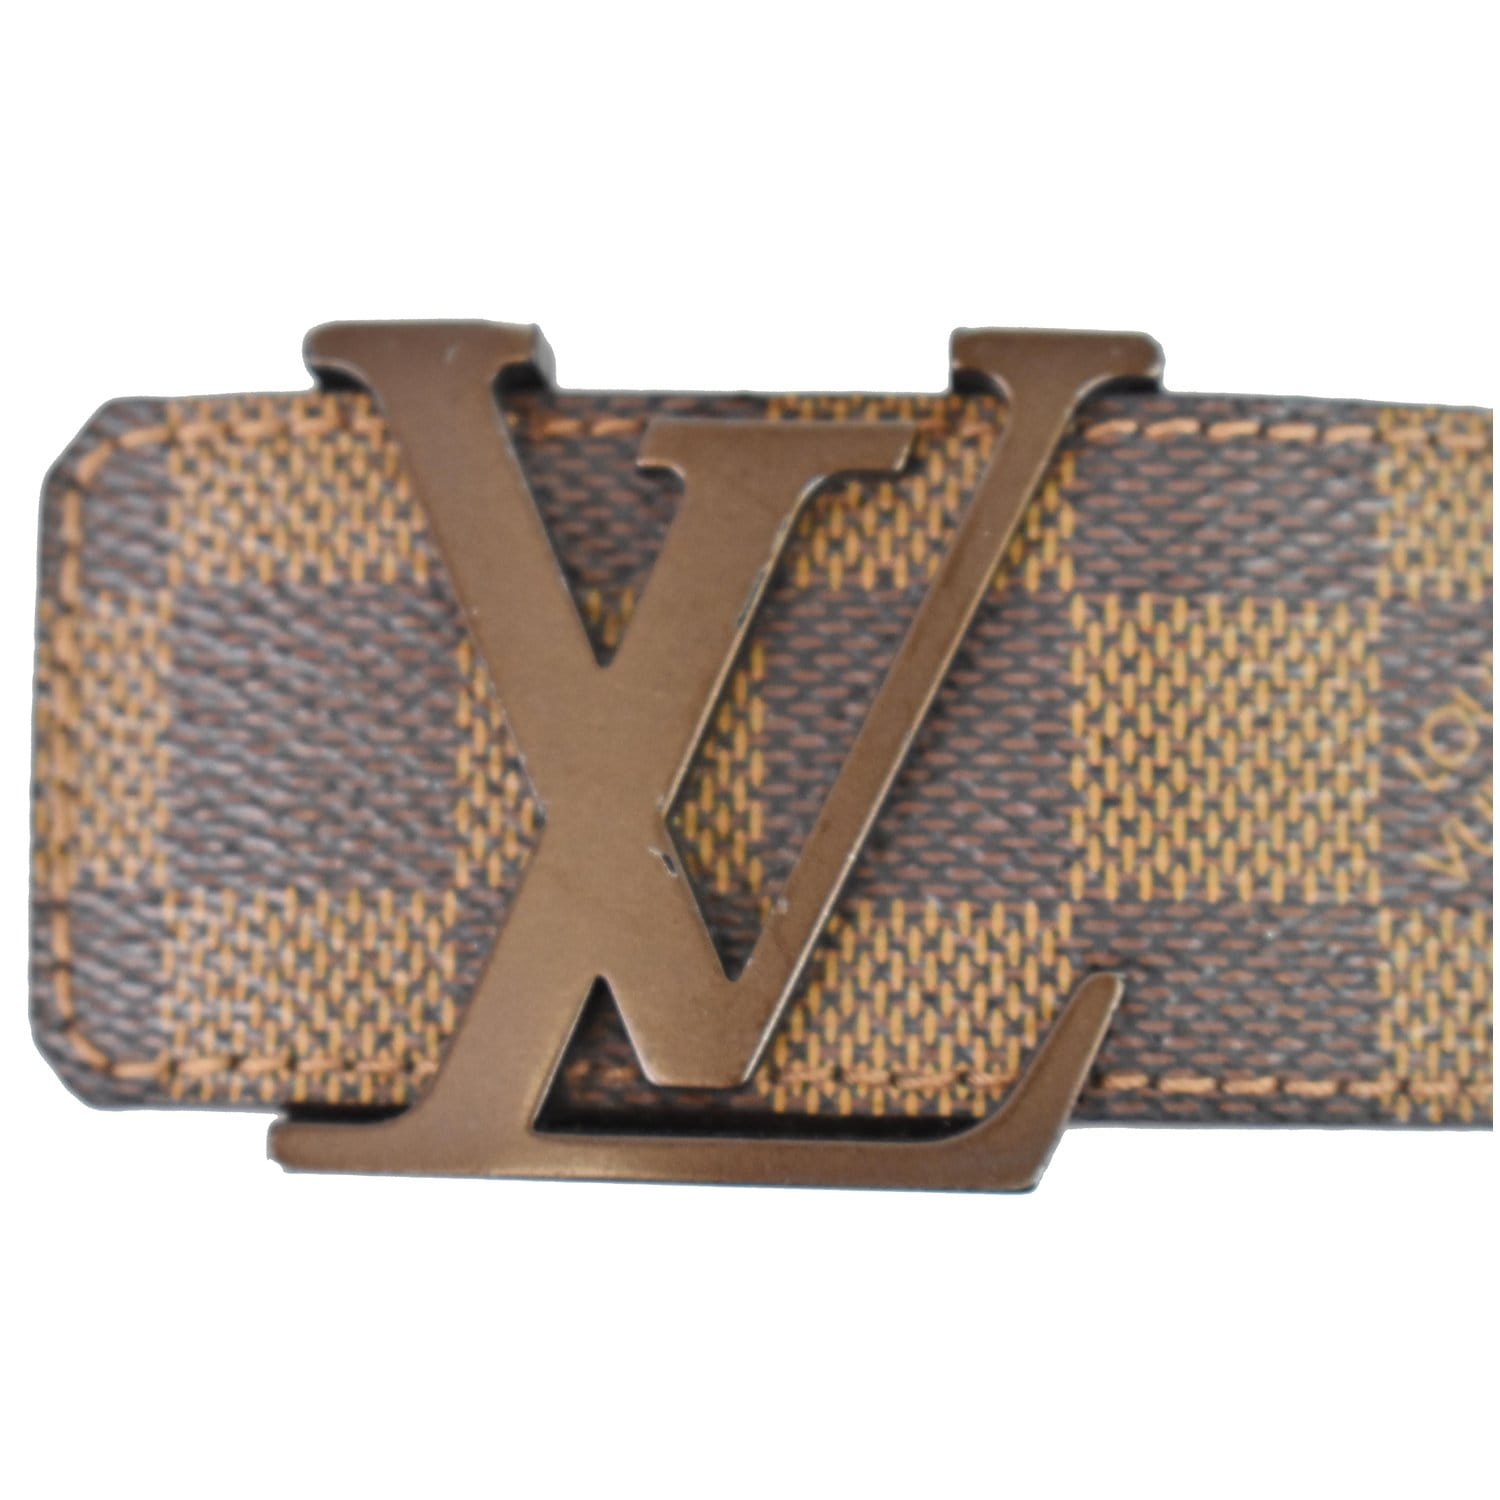 Louis Vuitton Belt Initiales Damier Ebene Canvas/Leather Brown in